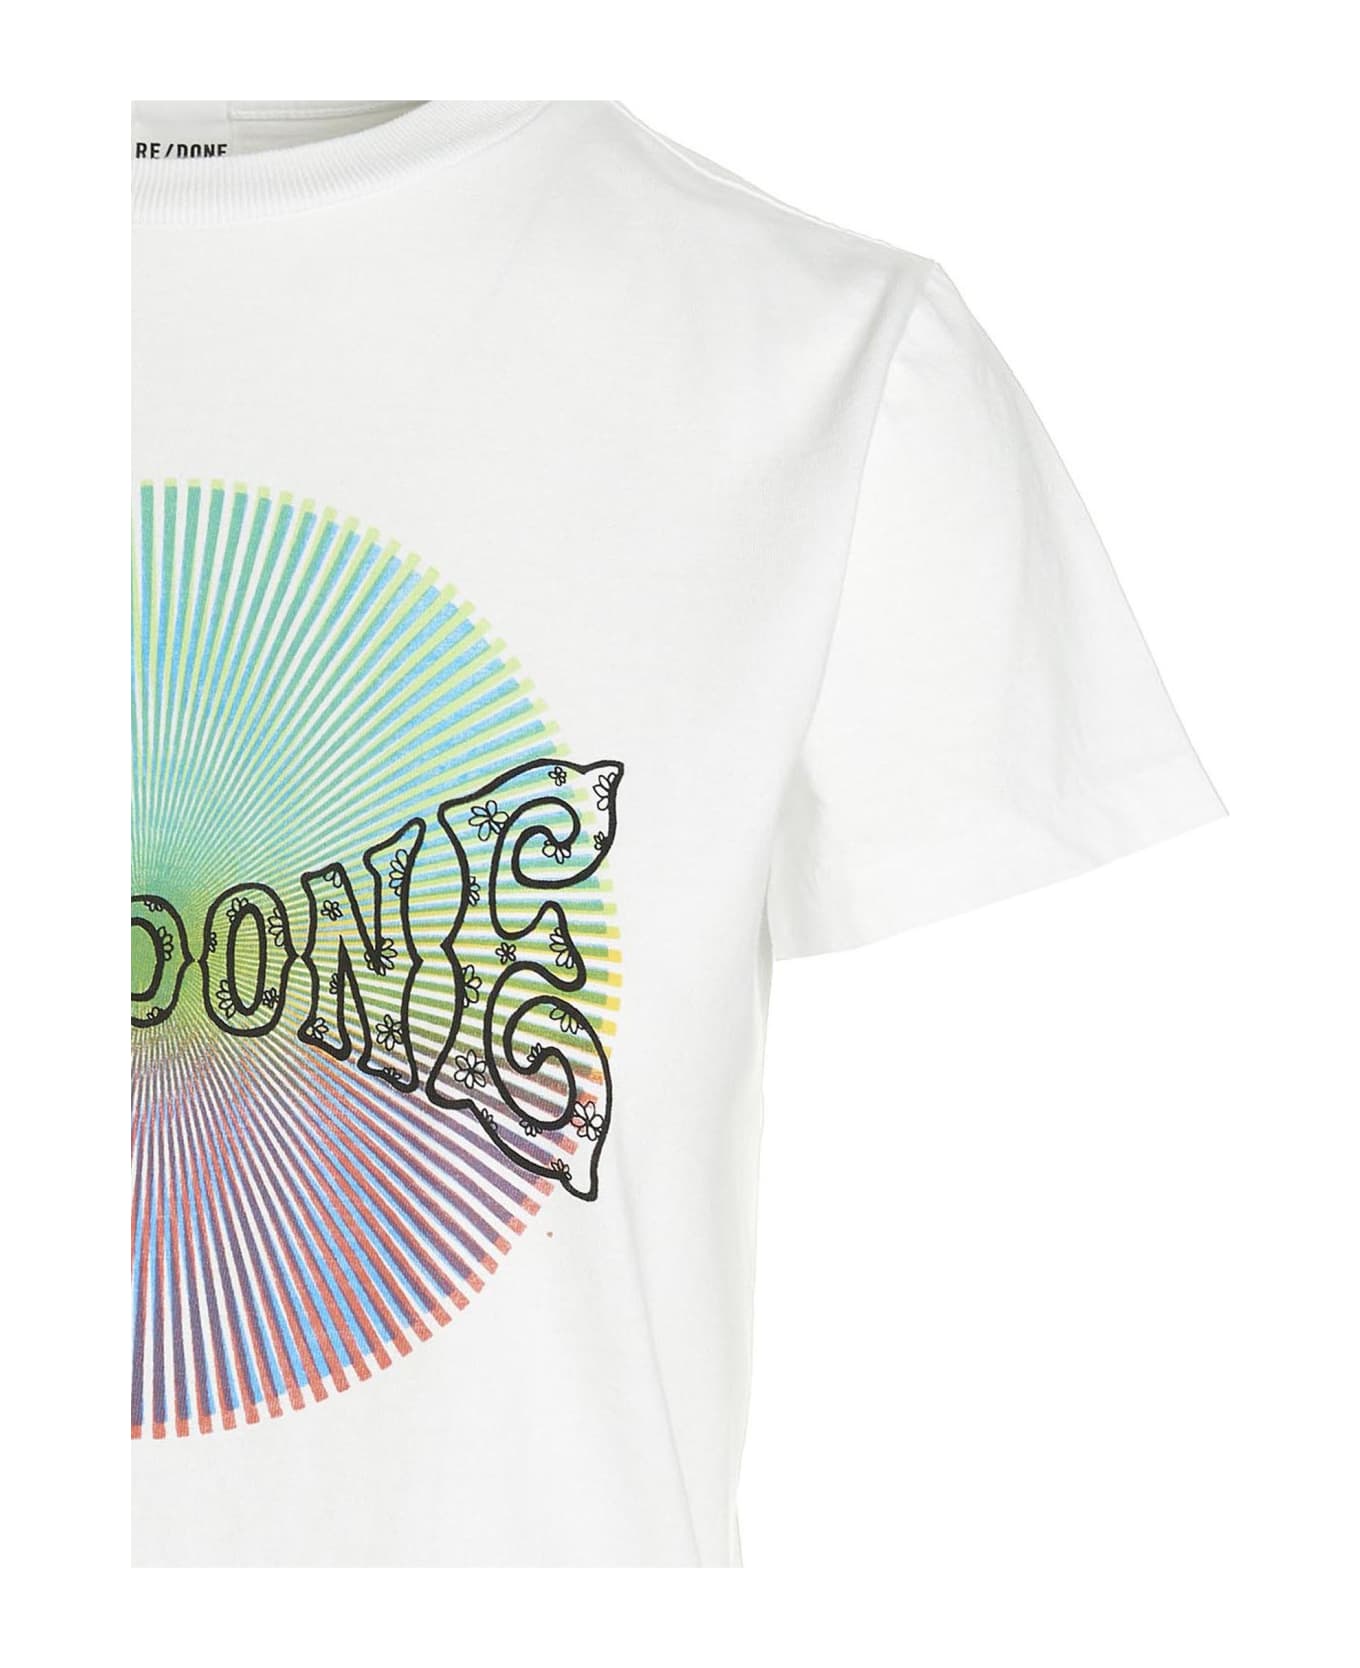 RE/DONE T.shirt 'classic Tee' - White